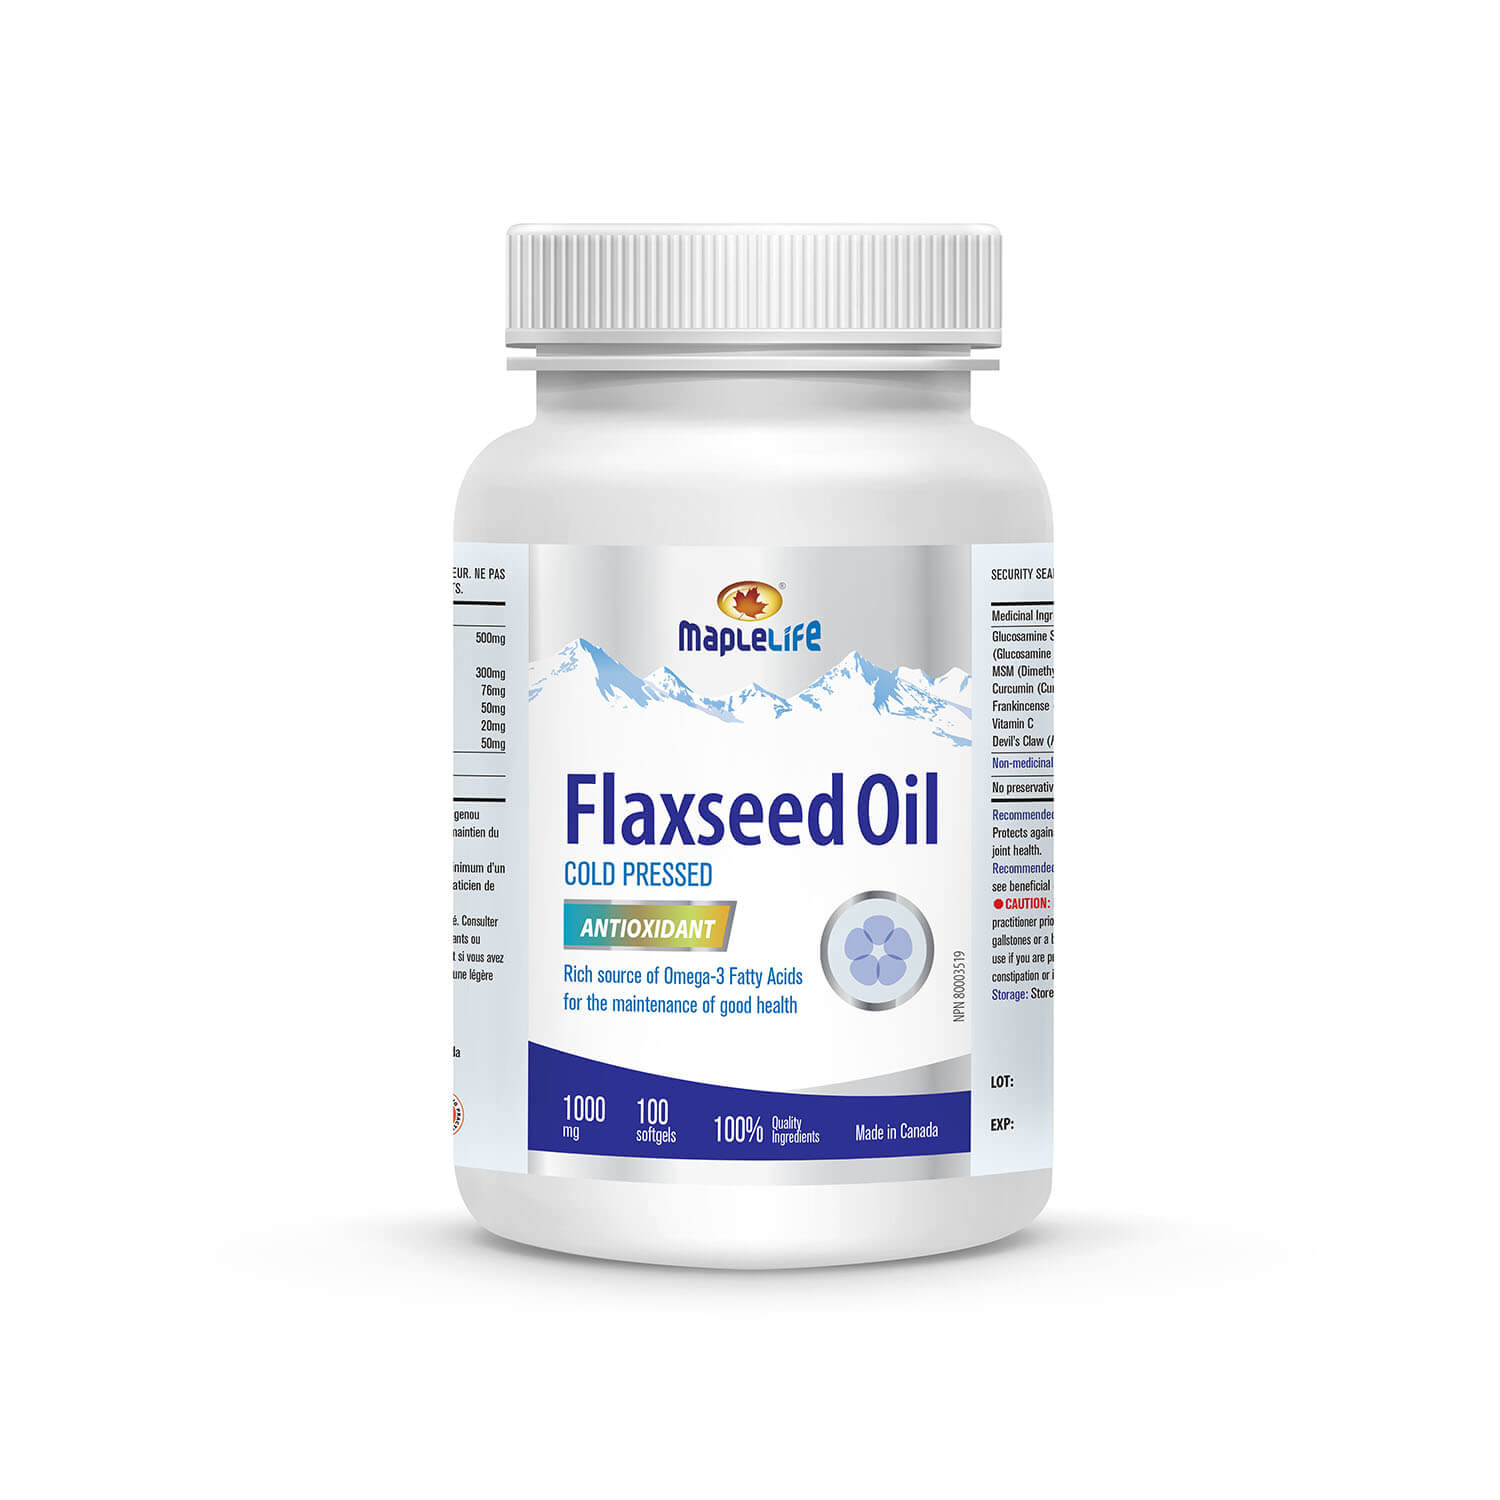 Flaxseed Oil Product Image